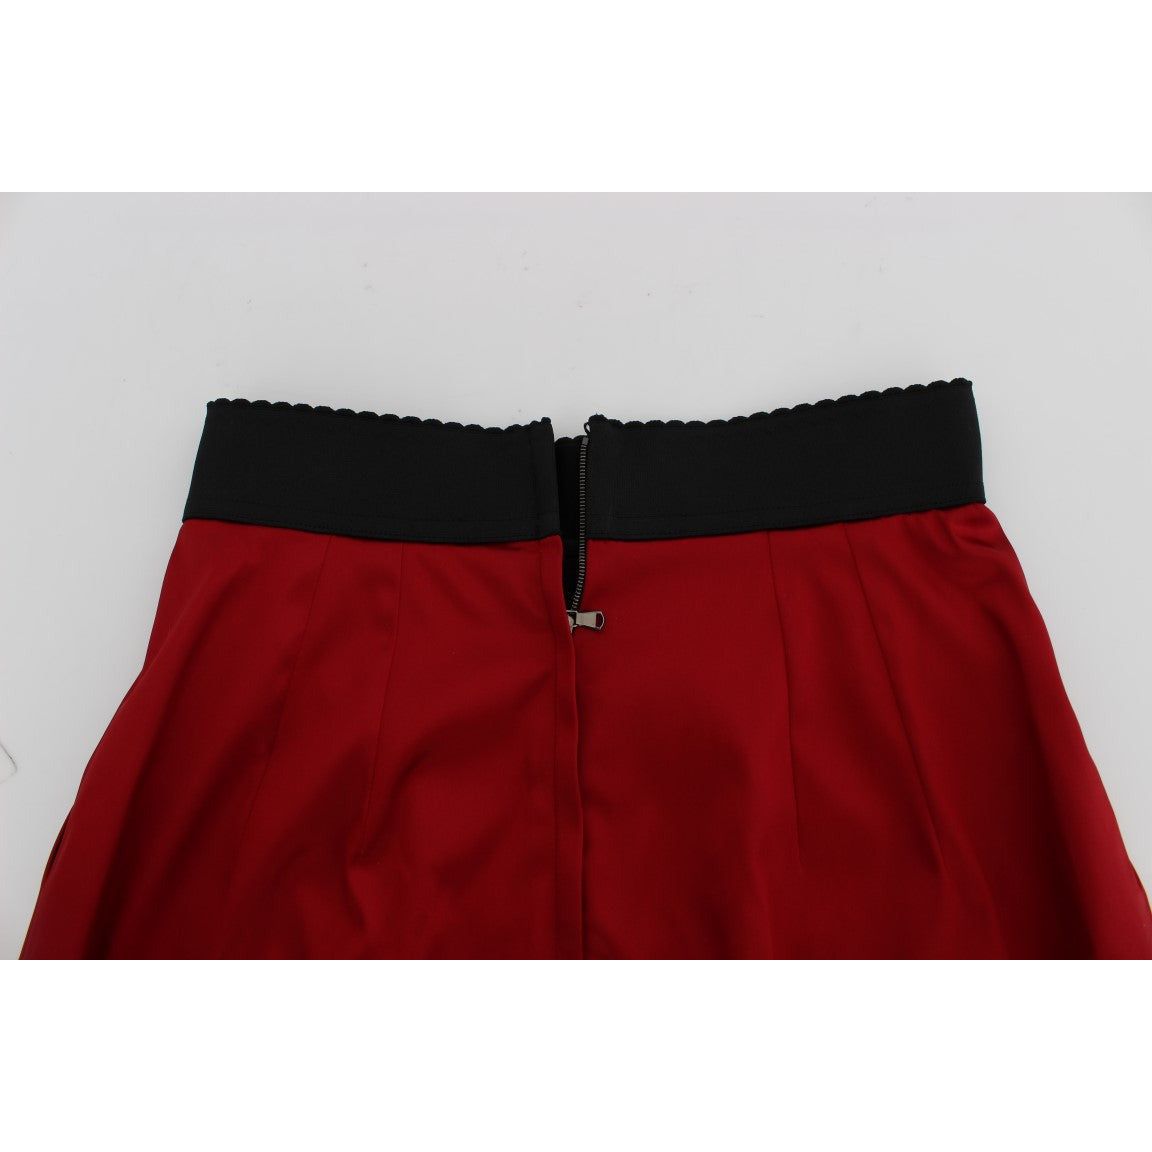 Dolce & Gabbana Elegant Red Lace High-Waist Skirt red-black-lace-a-line-above-knee-skirt